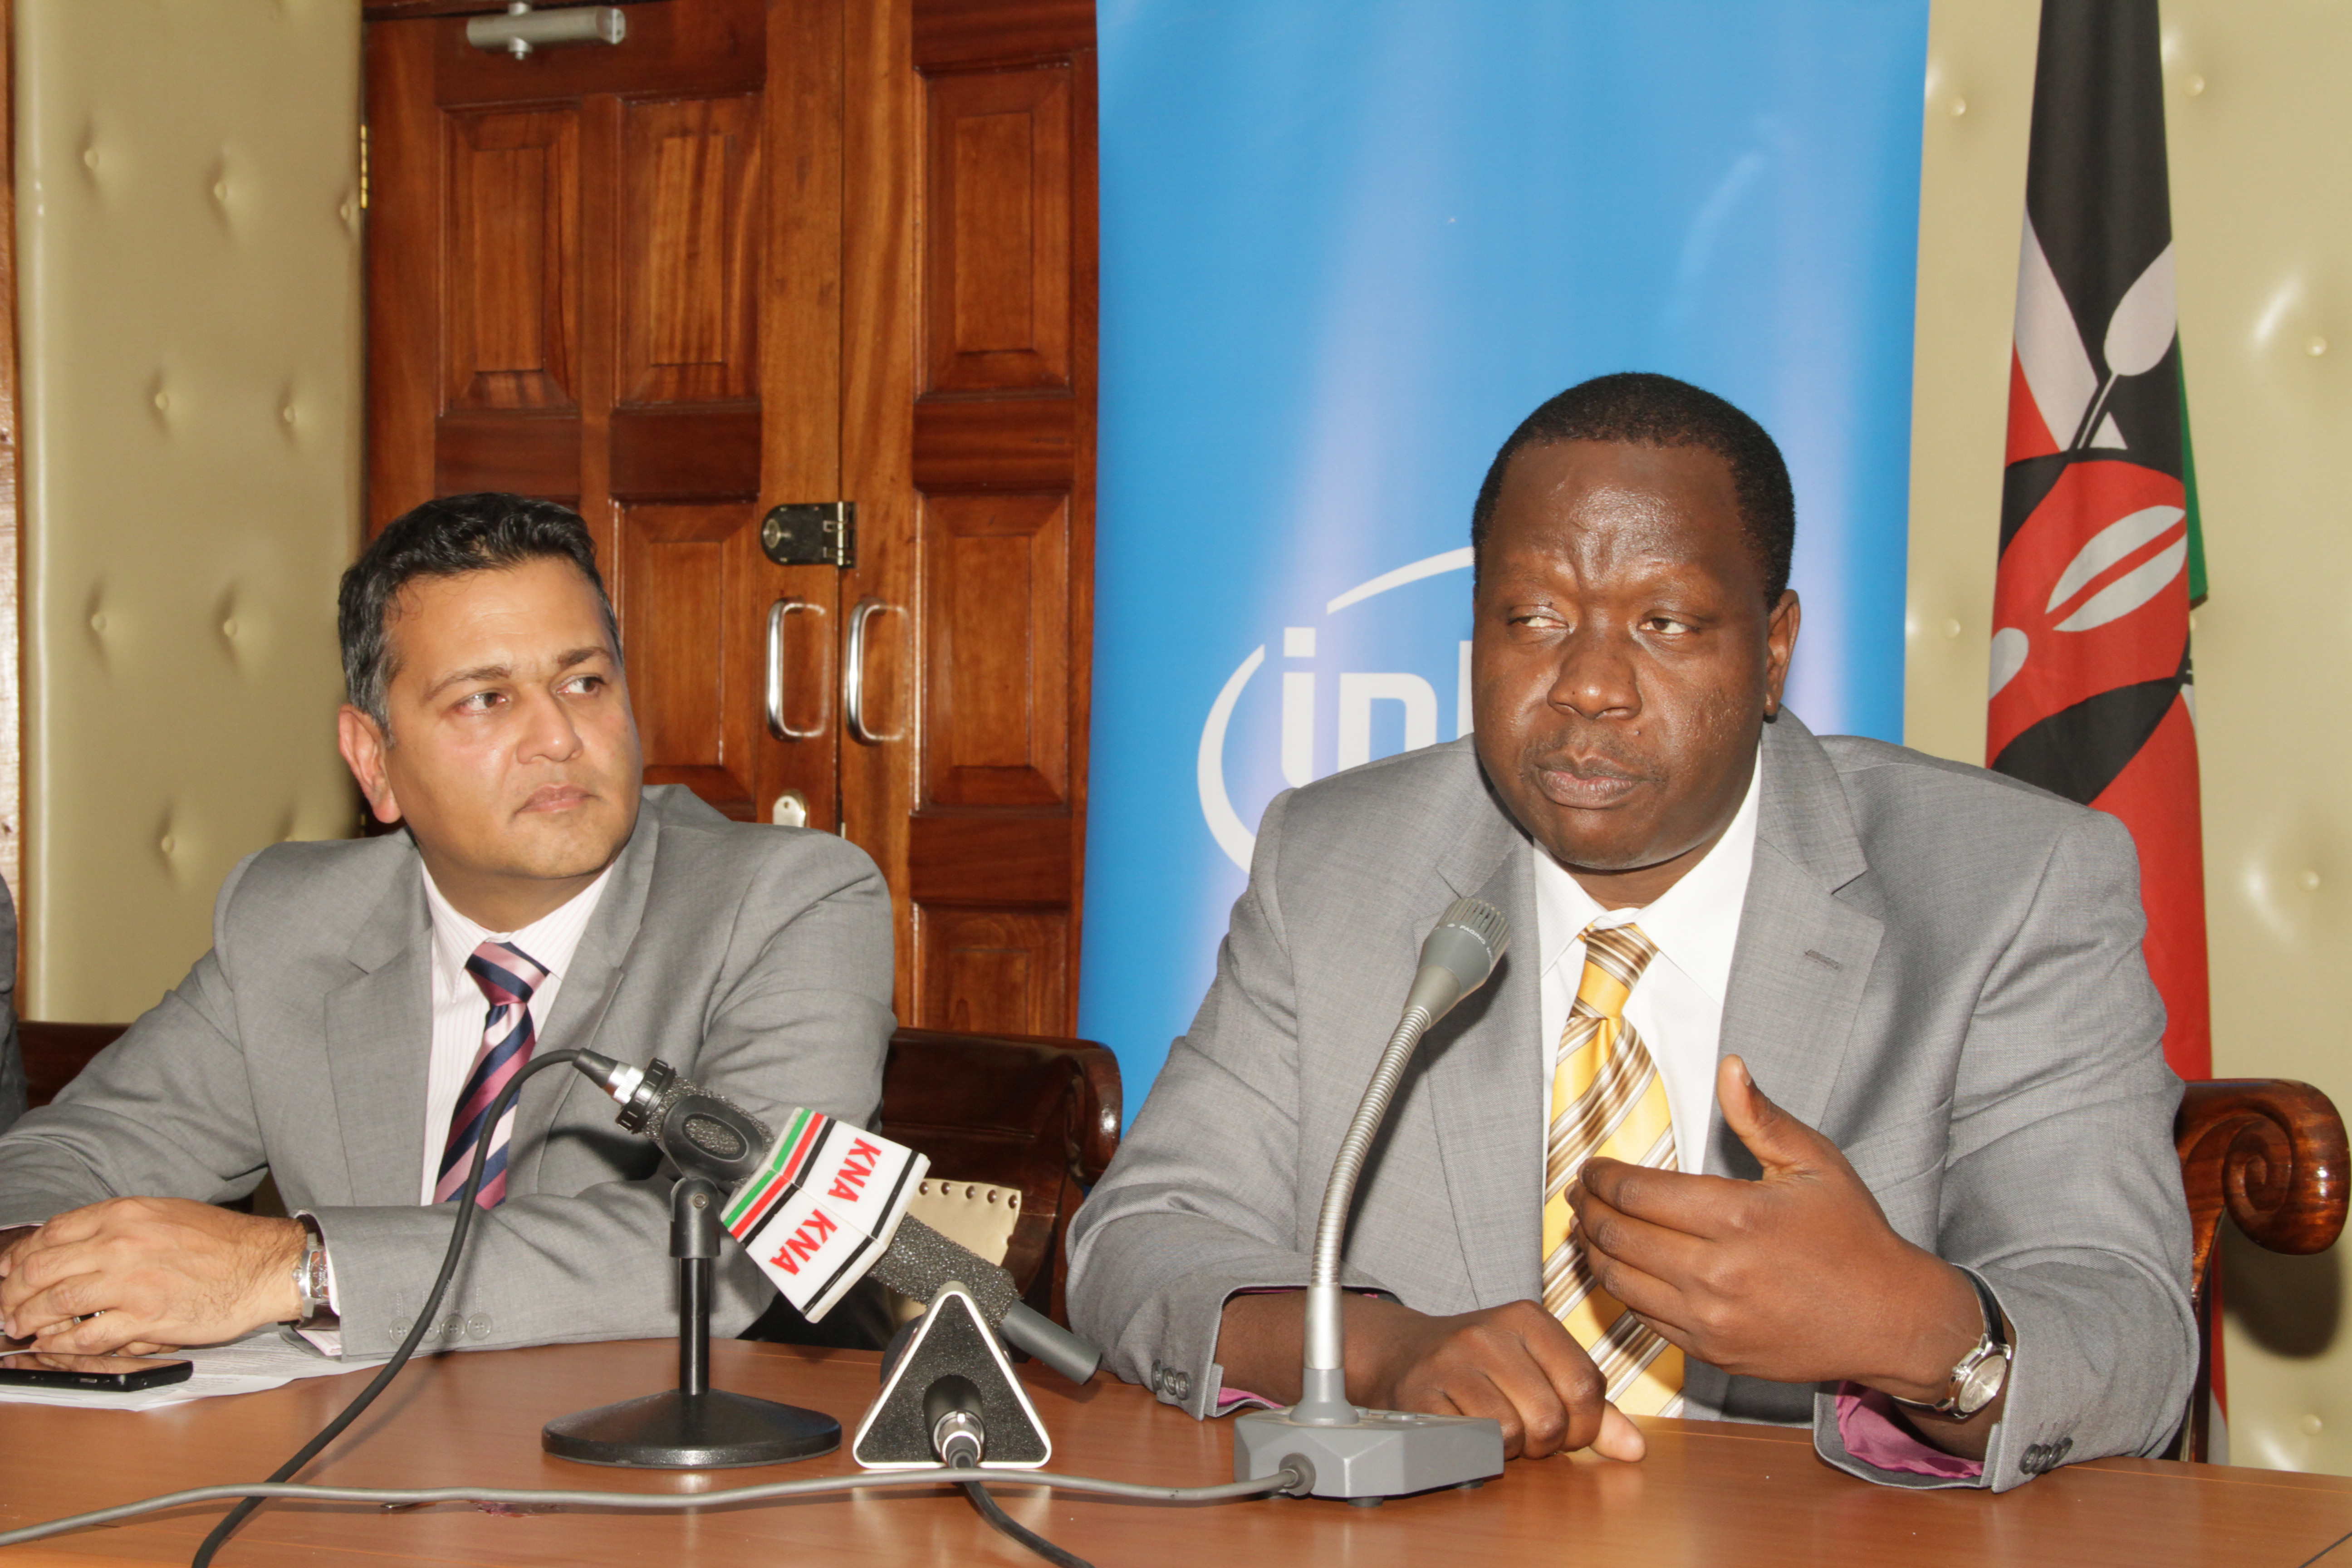  - Suraj-Shah-Corporate-Affairs-Manager-Intel-East-Africa-Cabinet-Secretary-Ministry-of-ICT-Dr-Fred-Matiangi-2